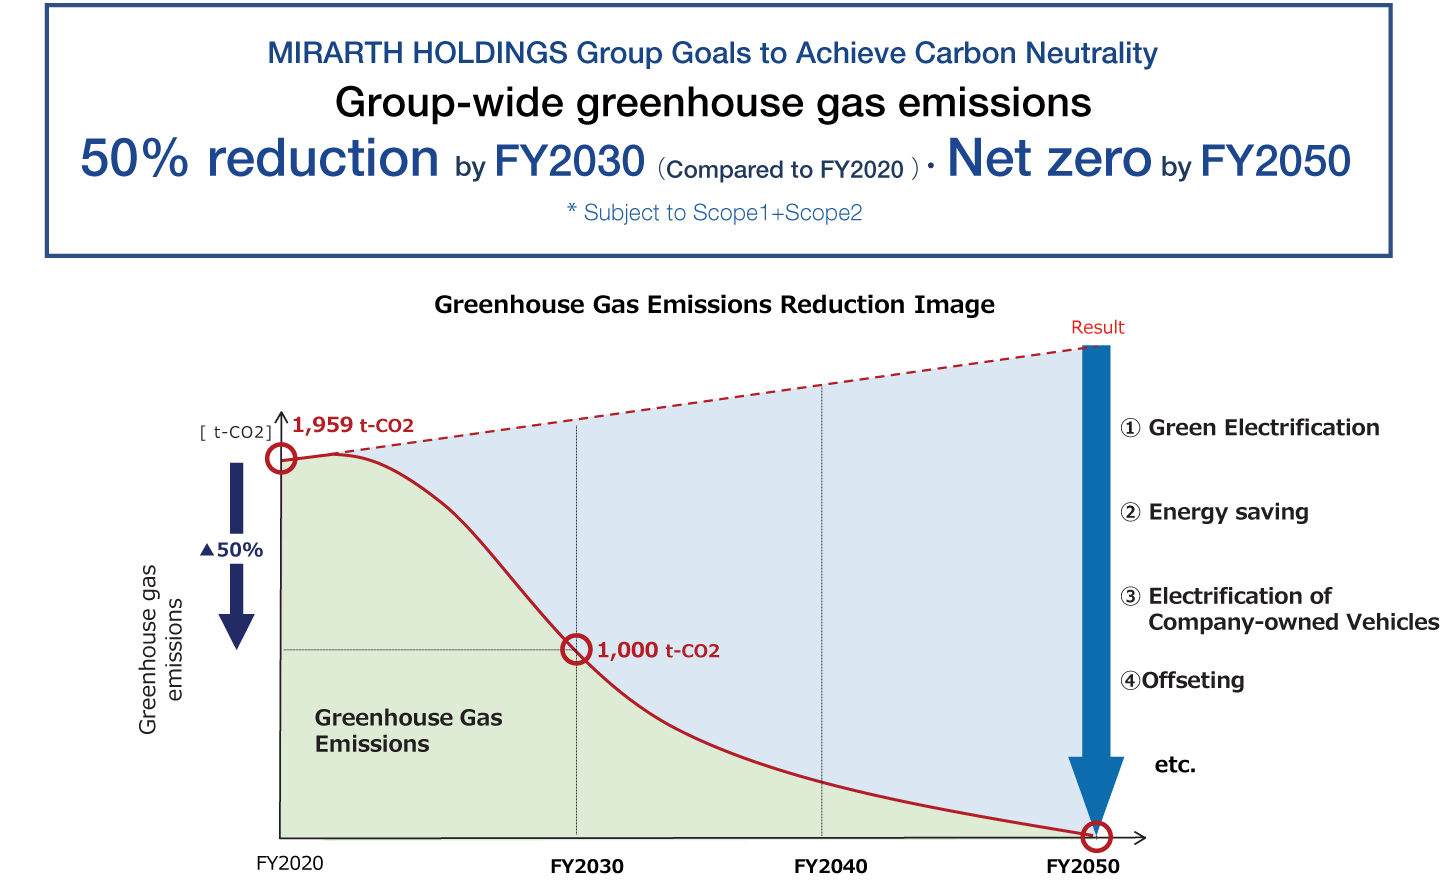 Greenhouse Gas Emissions Reduction Image